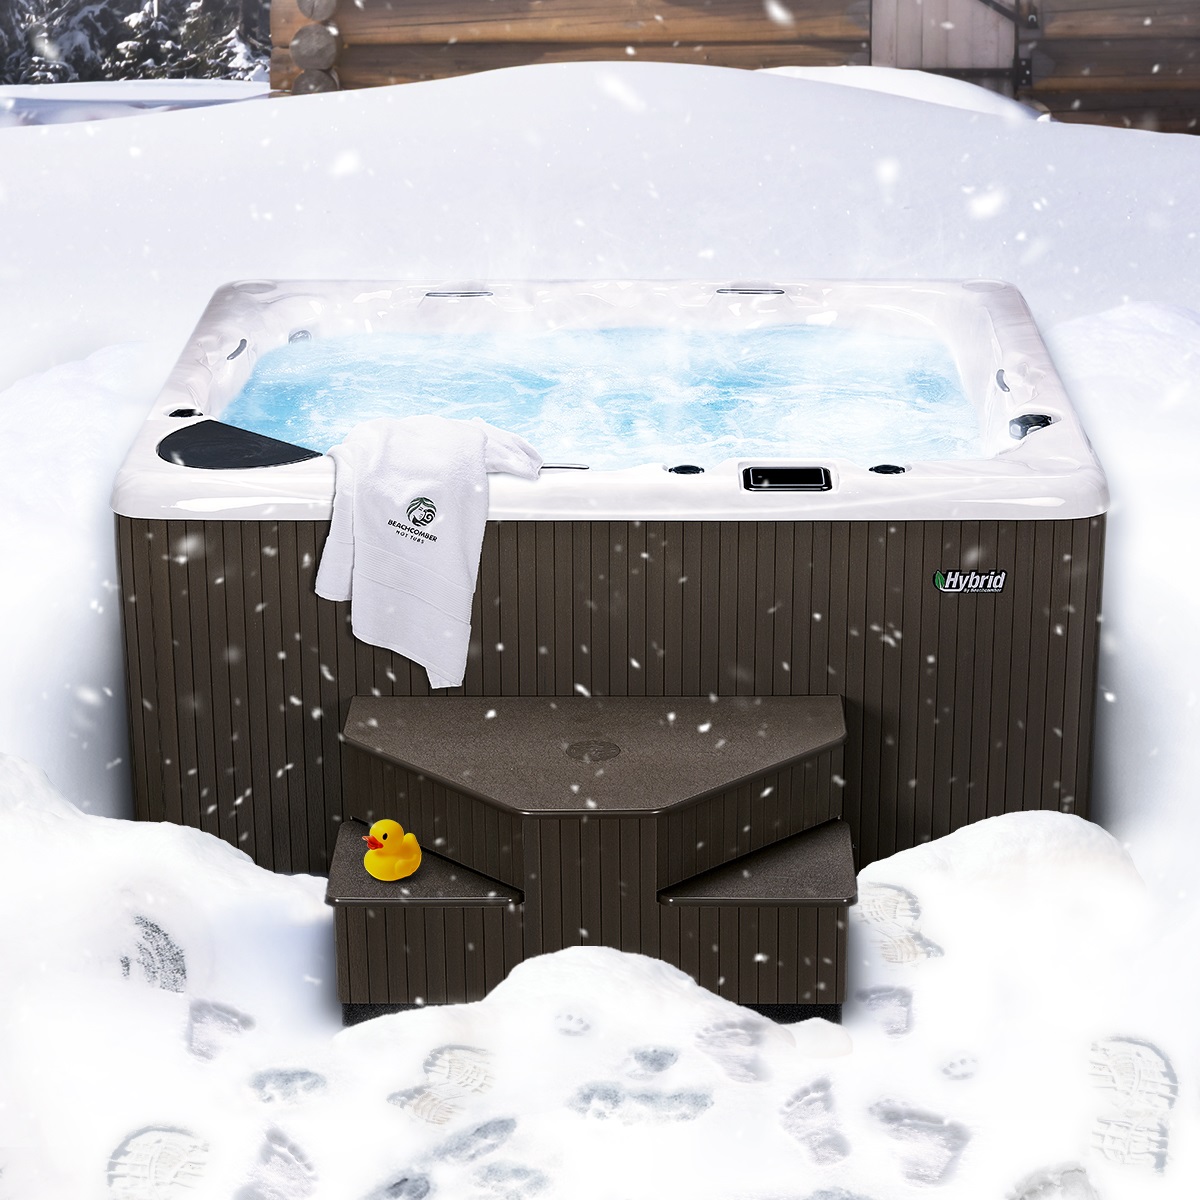 Tips for Hot Tubbing in the Cold